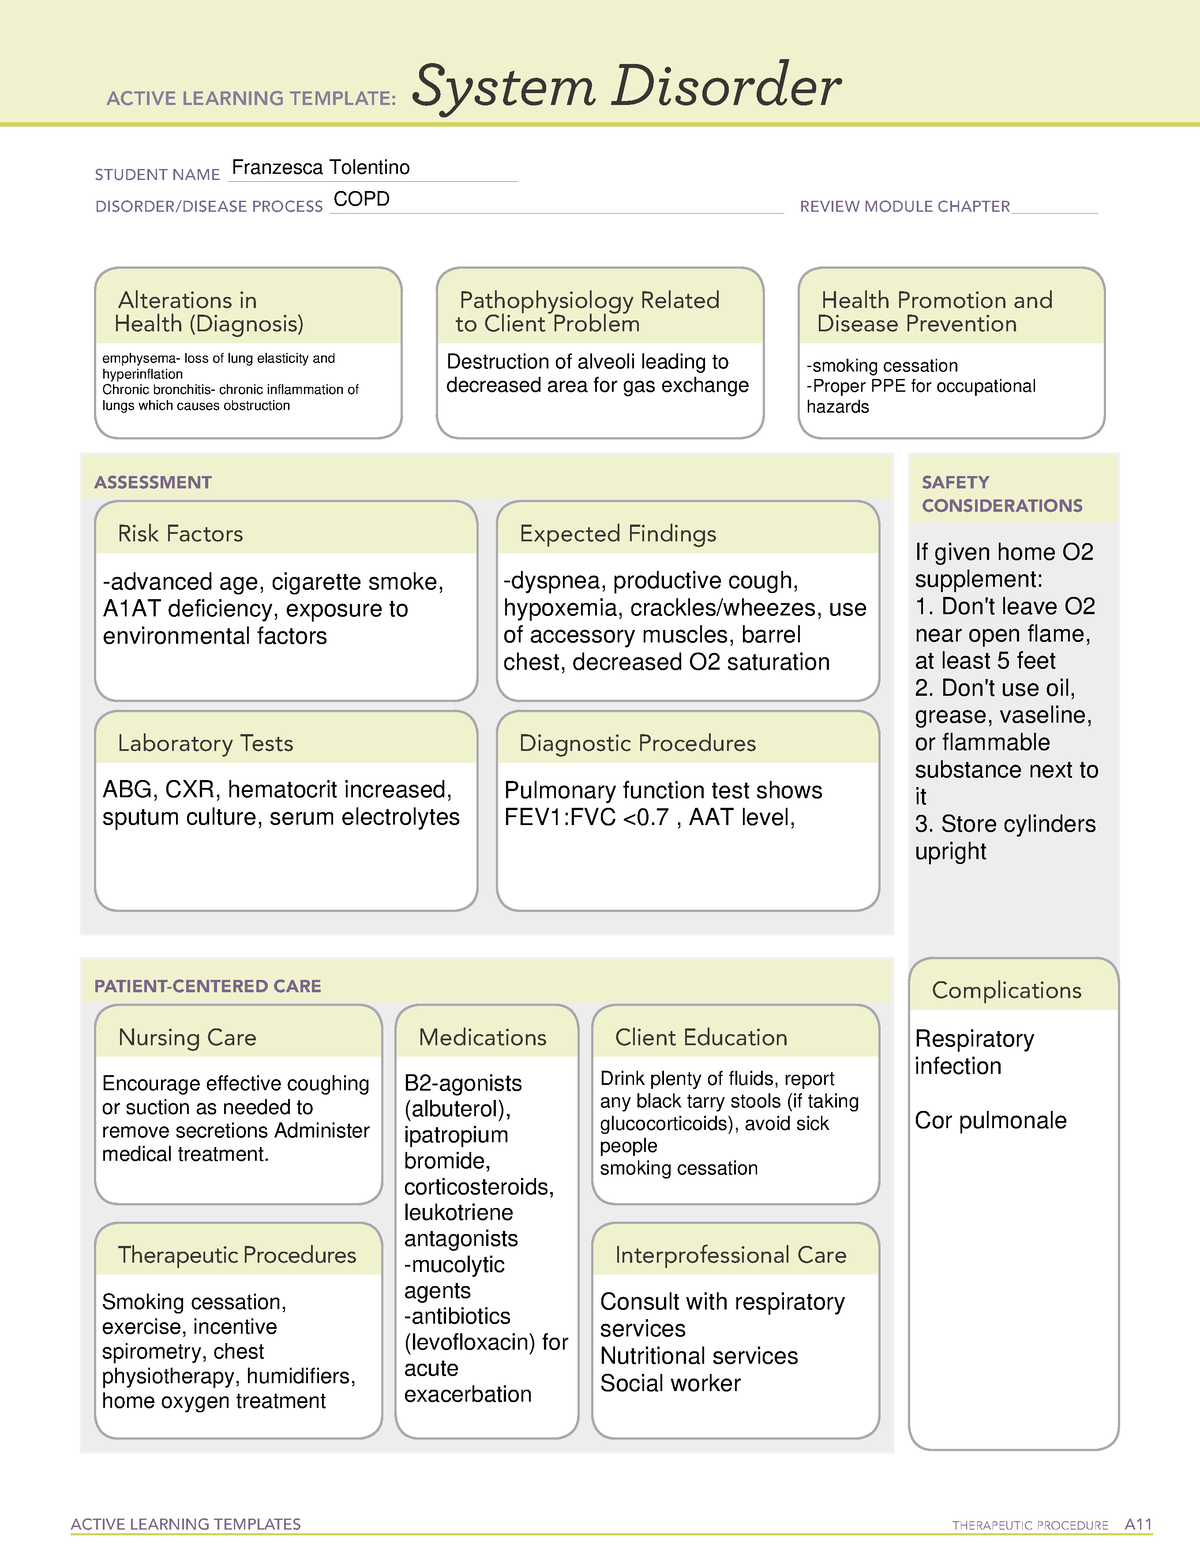 Ati System Disorder Template Copd